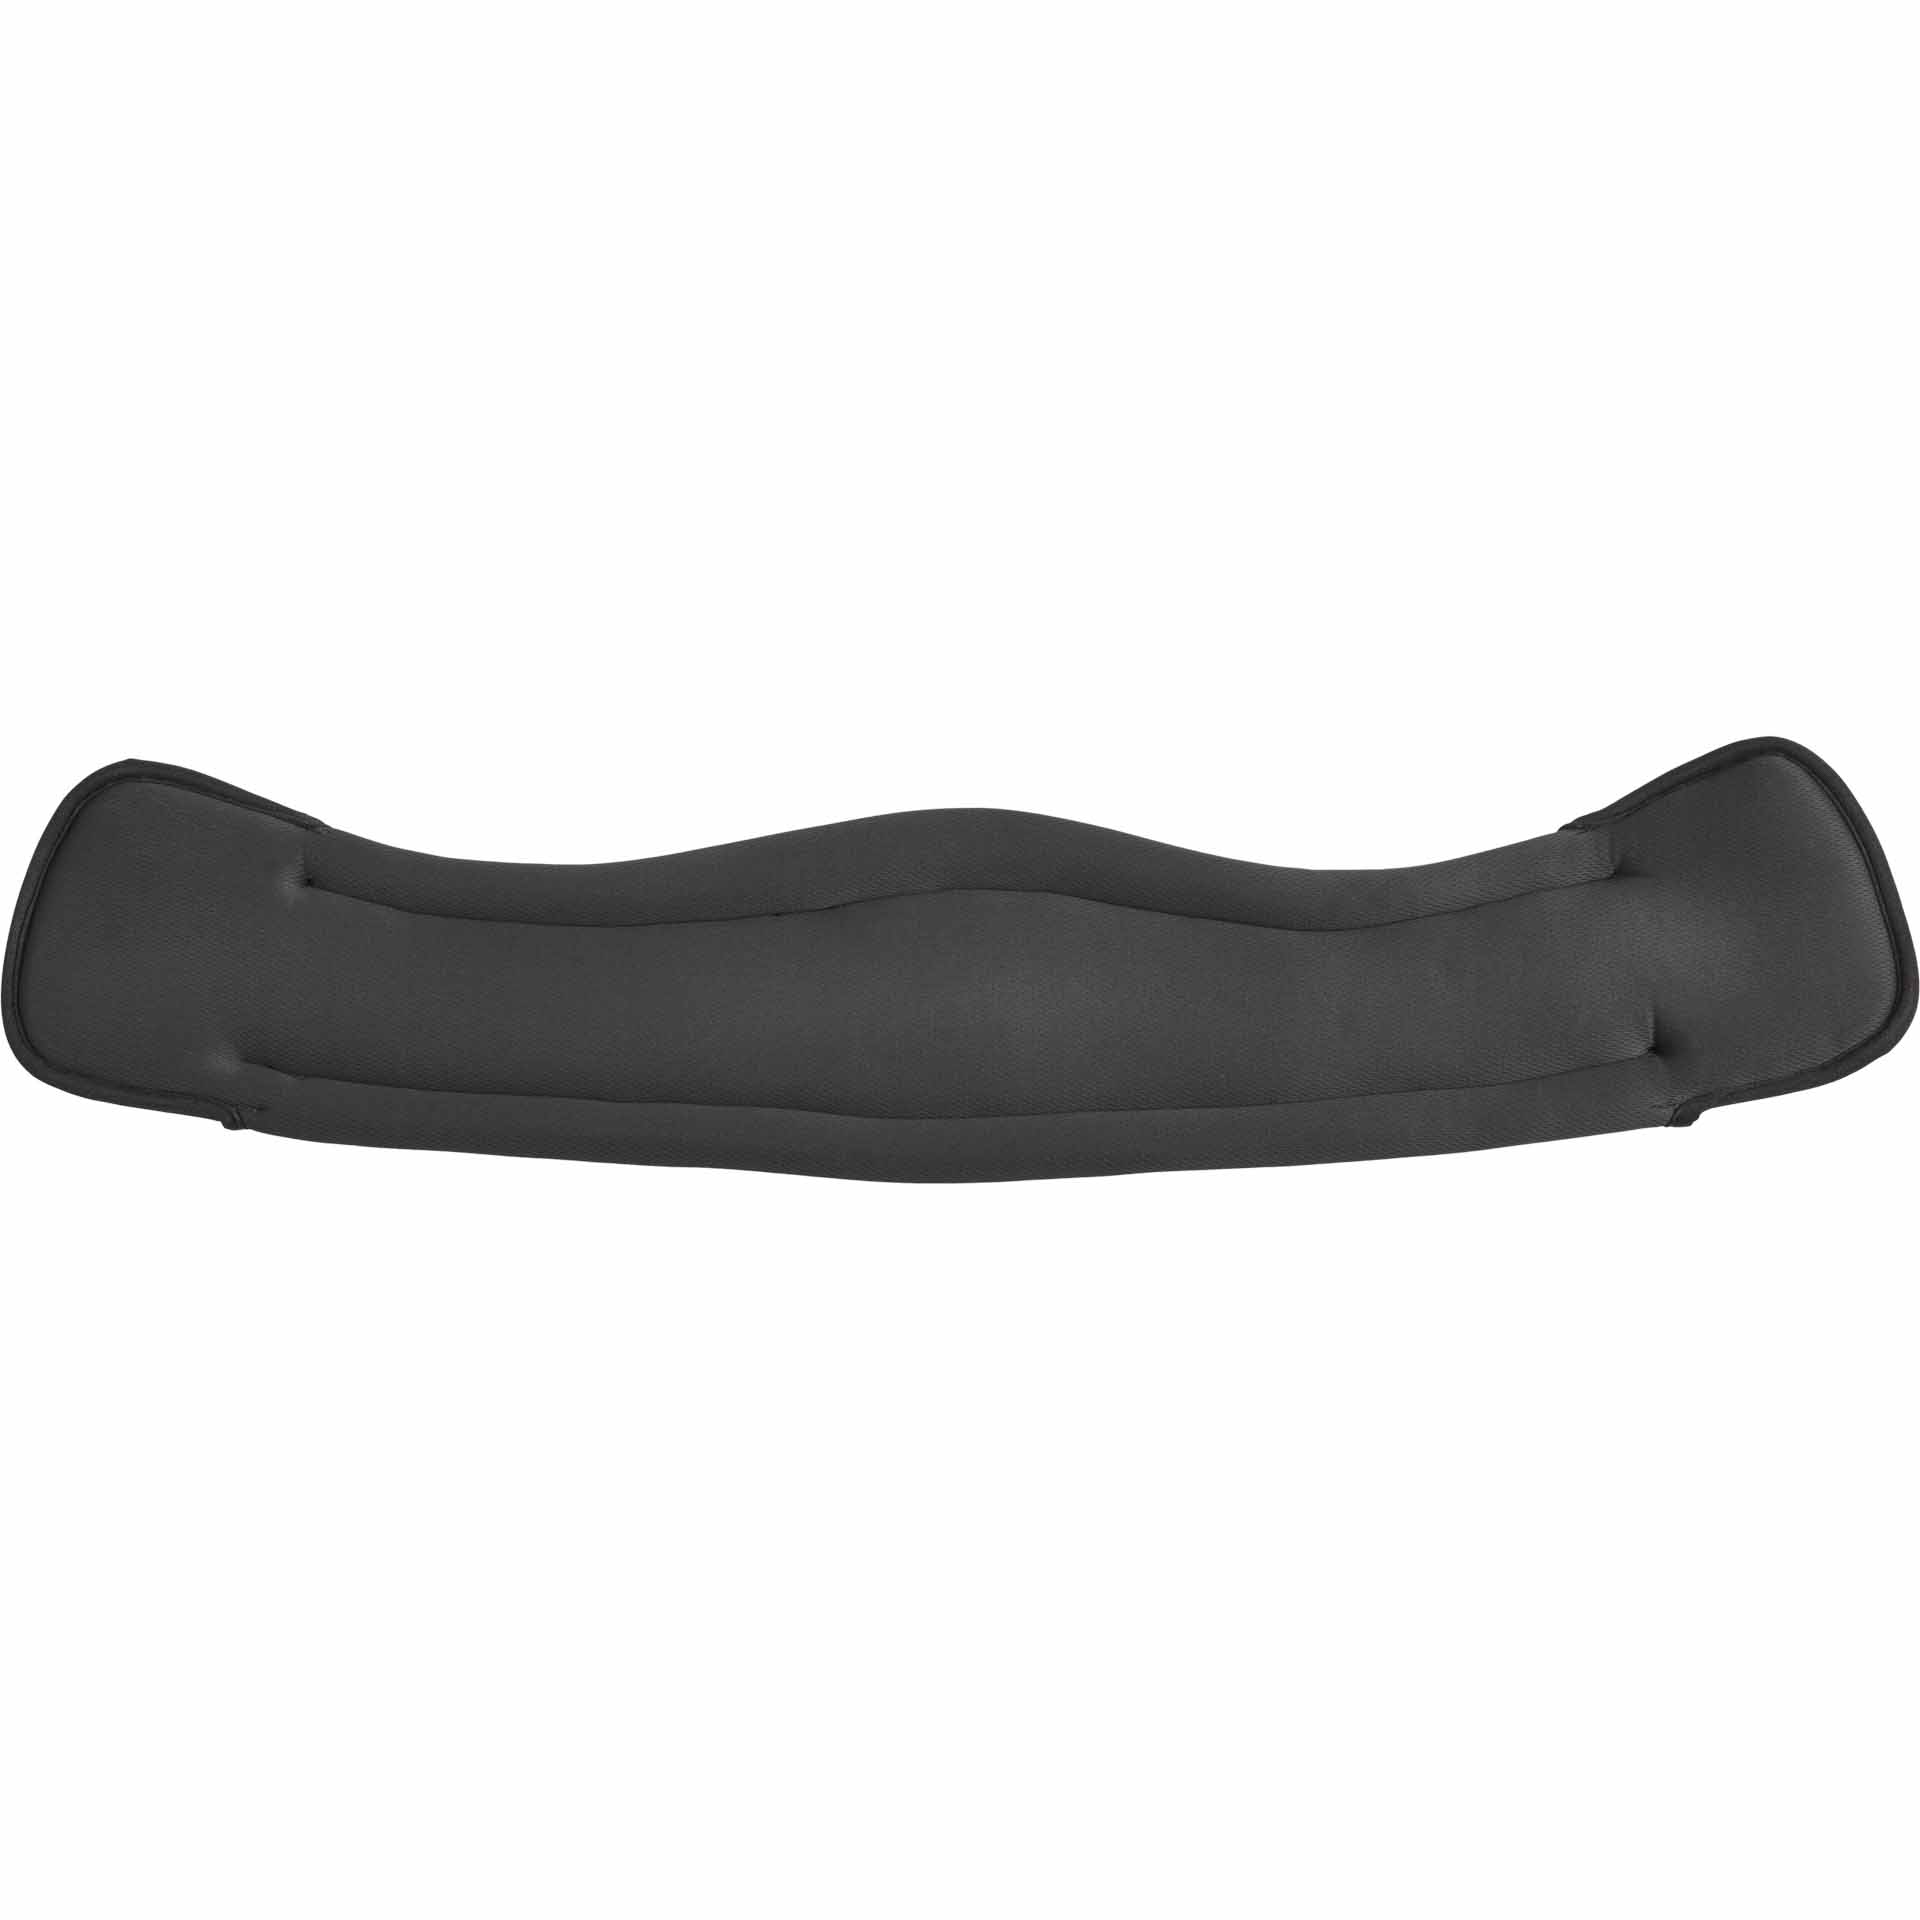 BUSSE Sottopancia OPTI-SUMMER-CURVED-DR D 50 nero